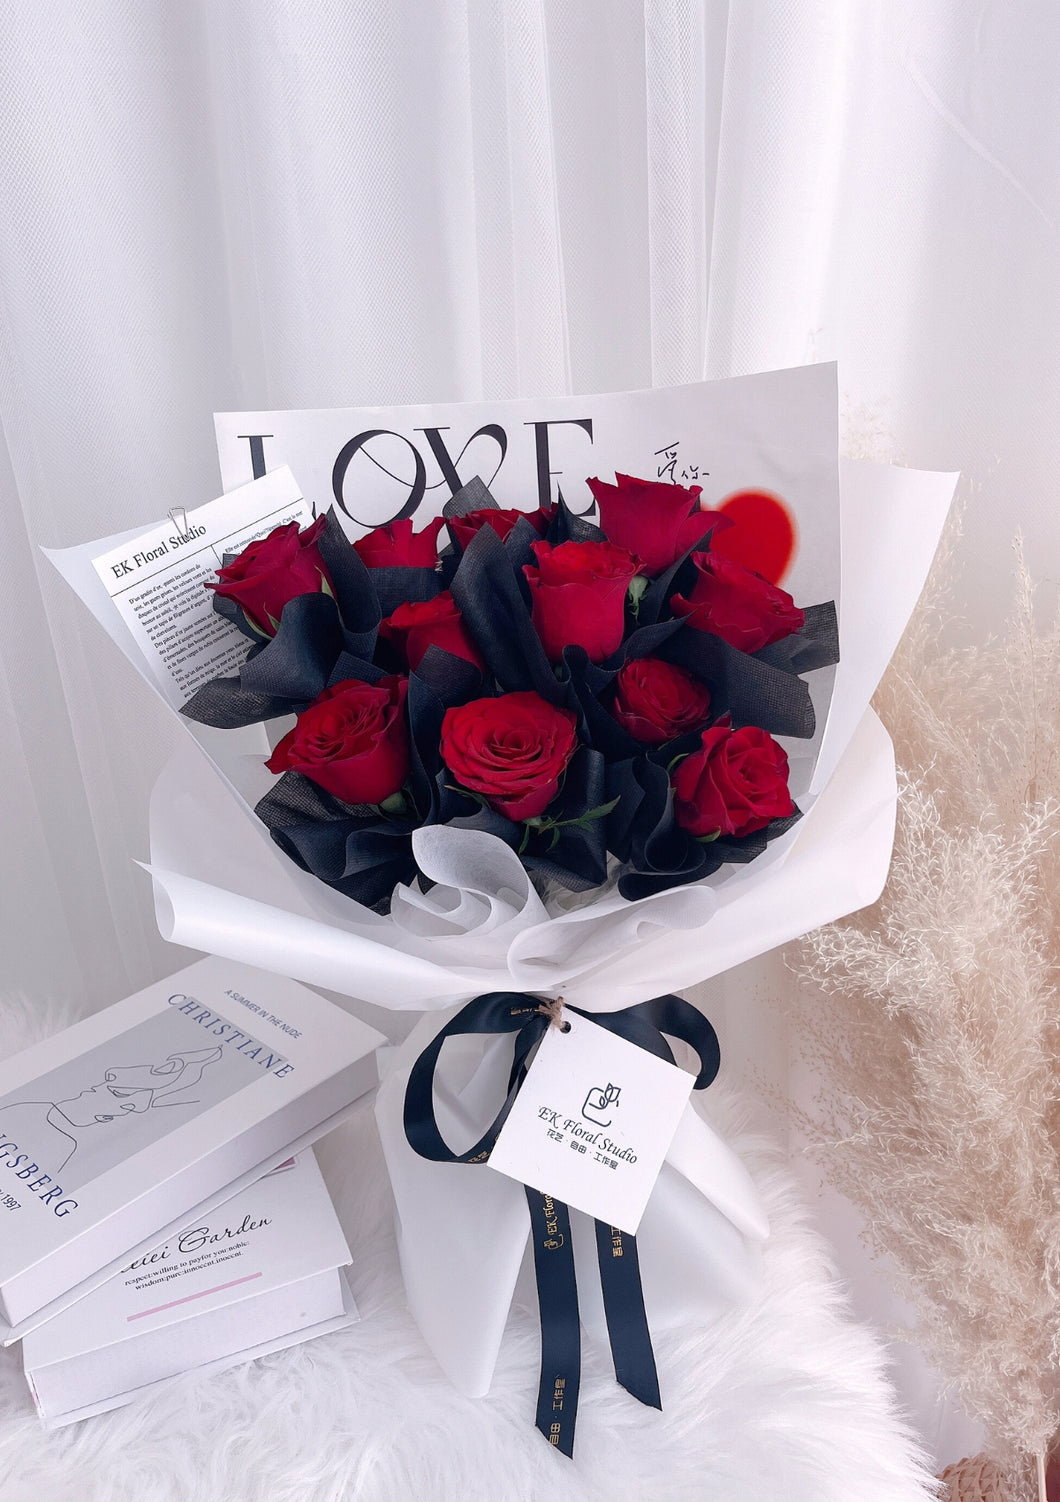 White Classic flowers red roses (You are my destiny) 白色经典（鲜花）红玫瑰·爱❤️的表达